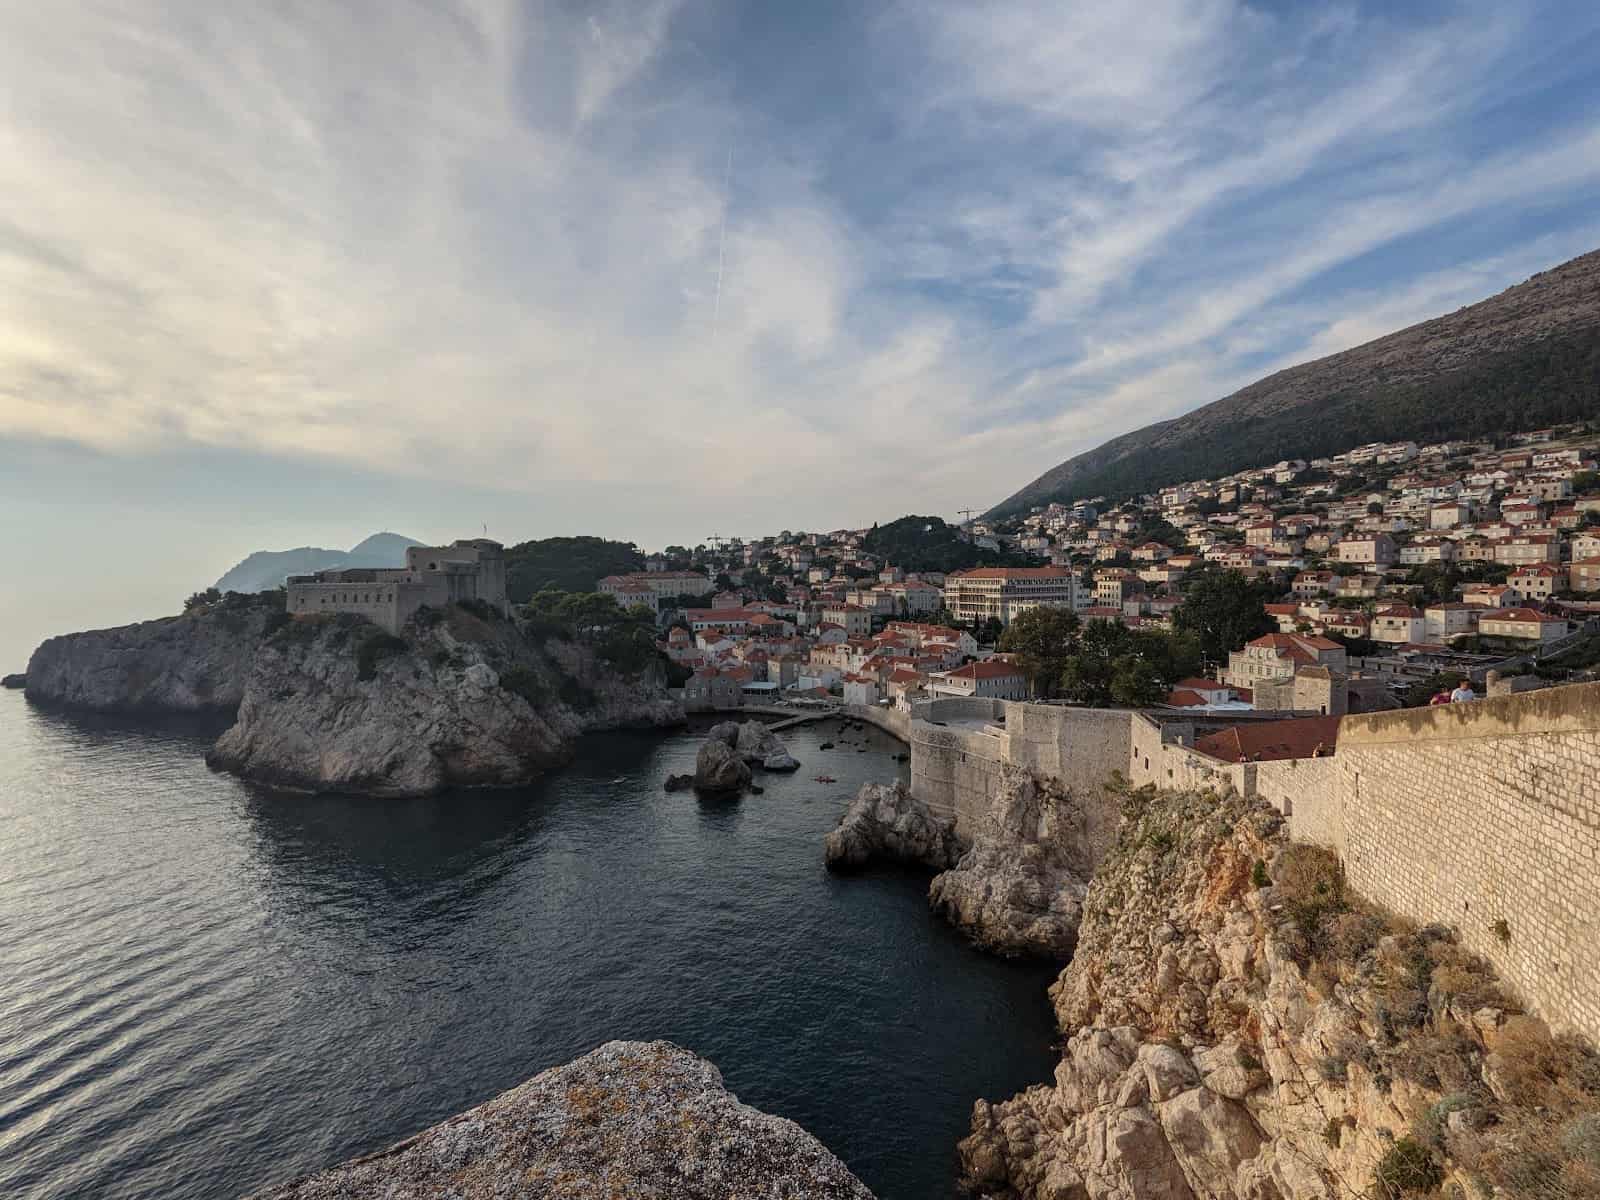 View of Dubrovnik, Croatia from across the water.